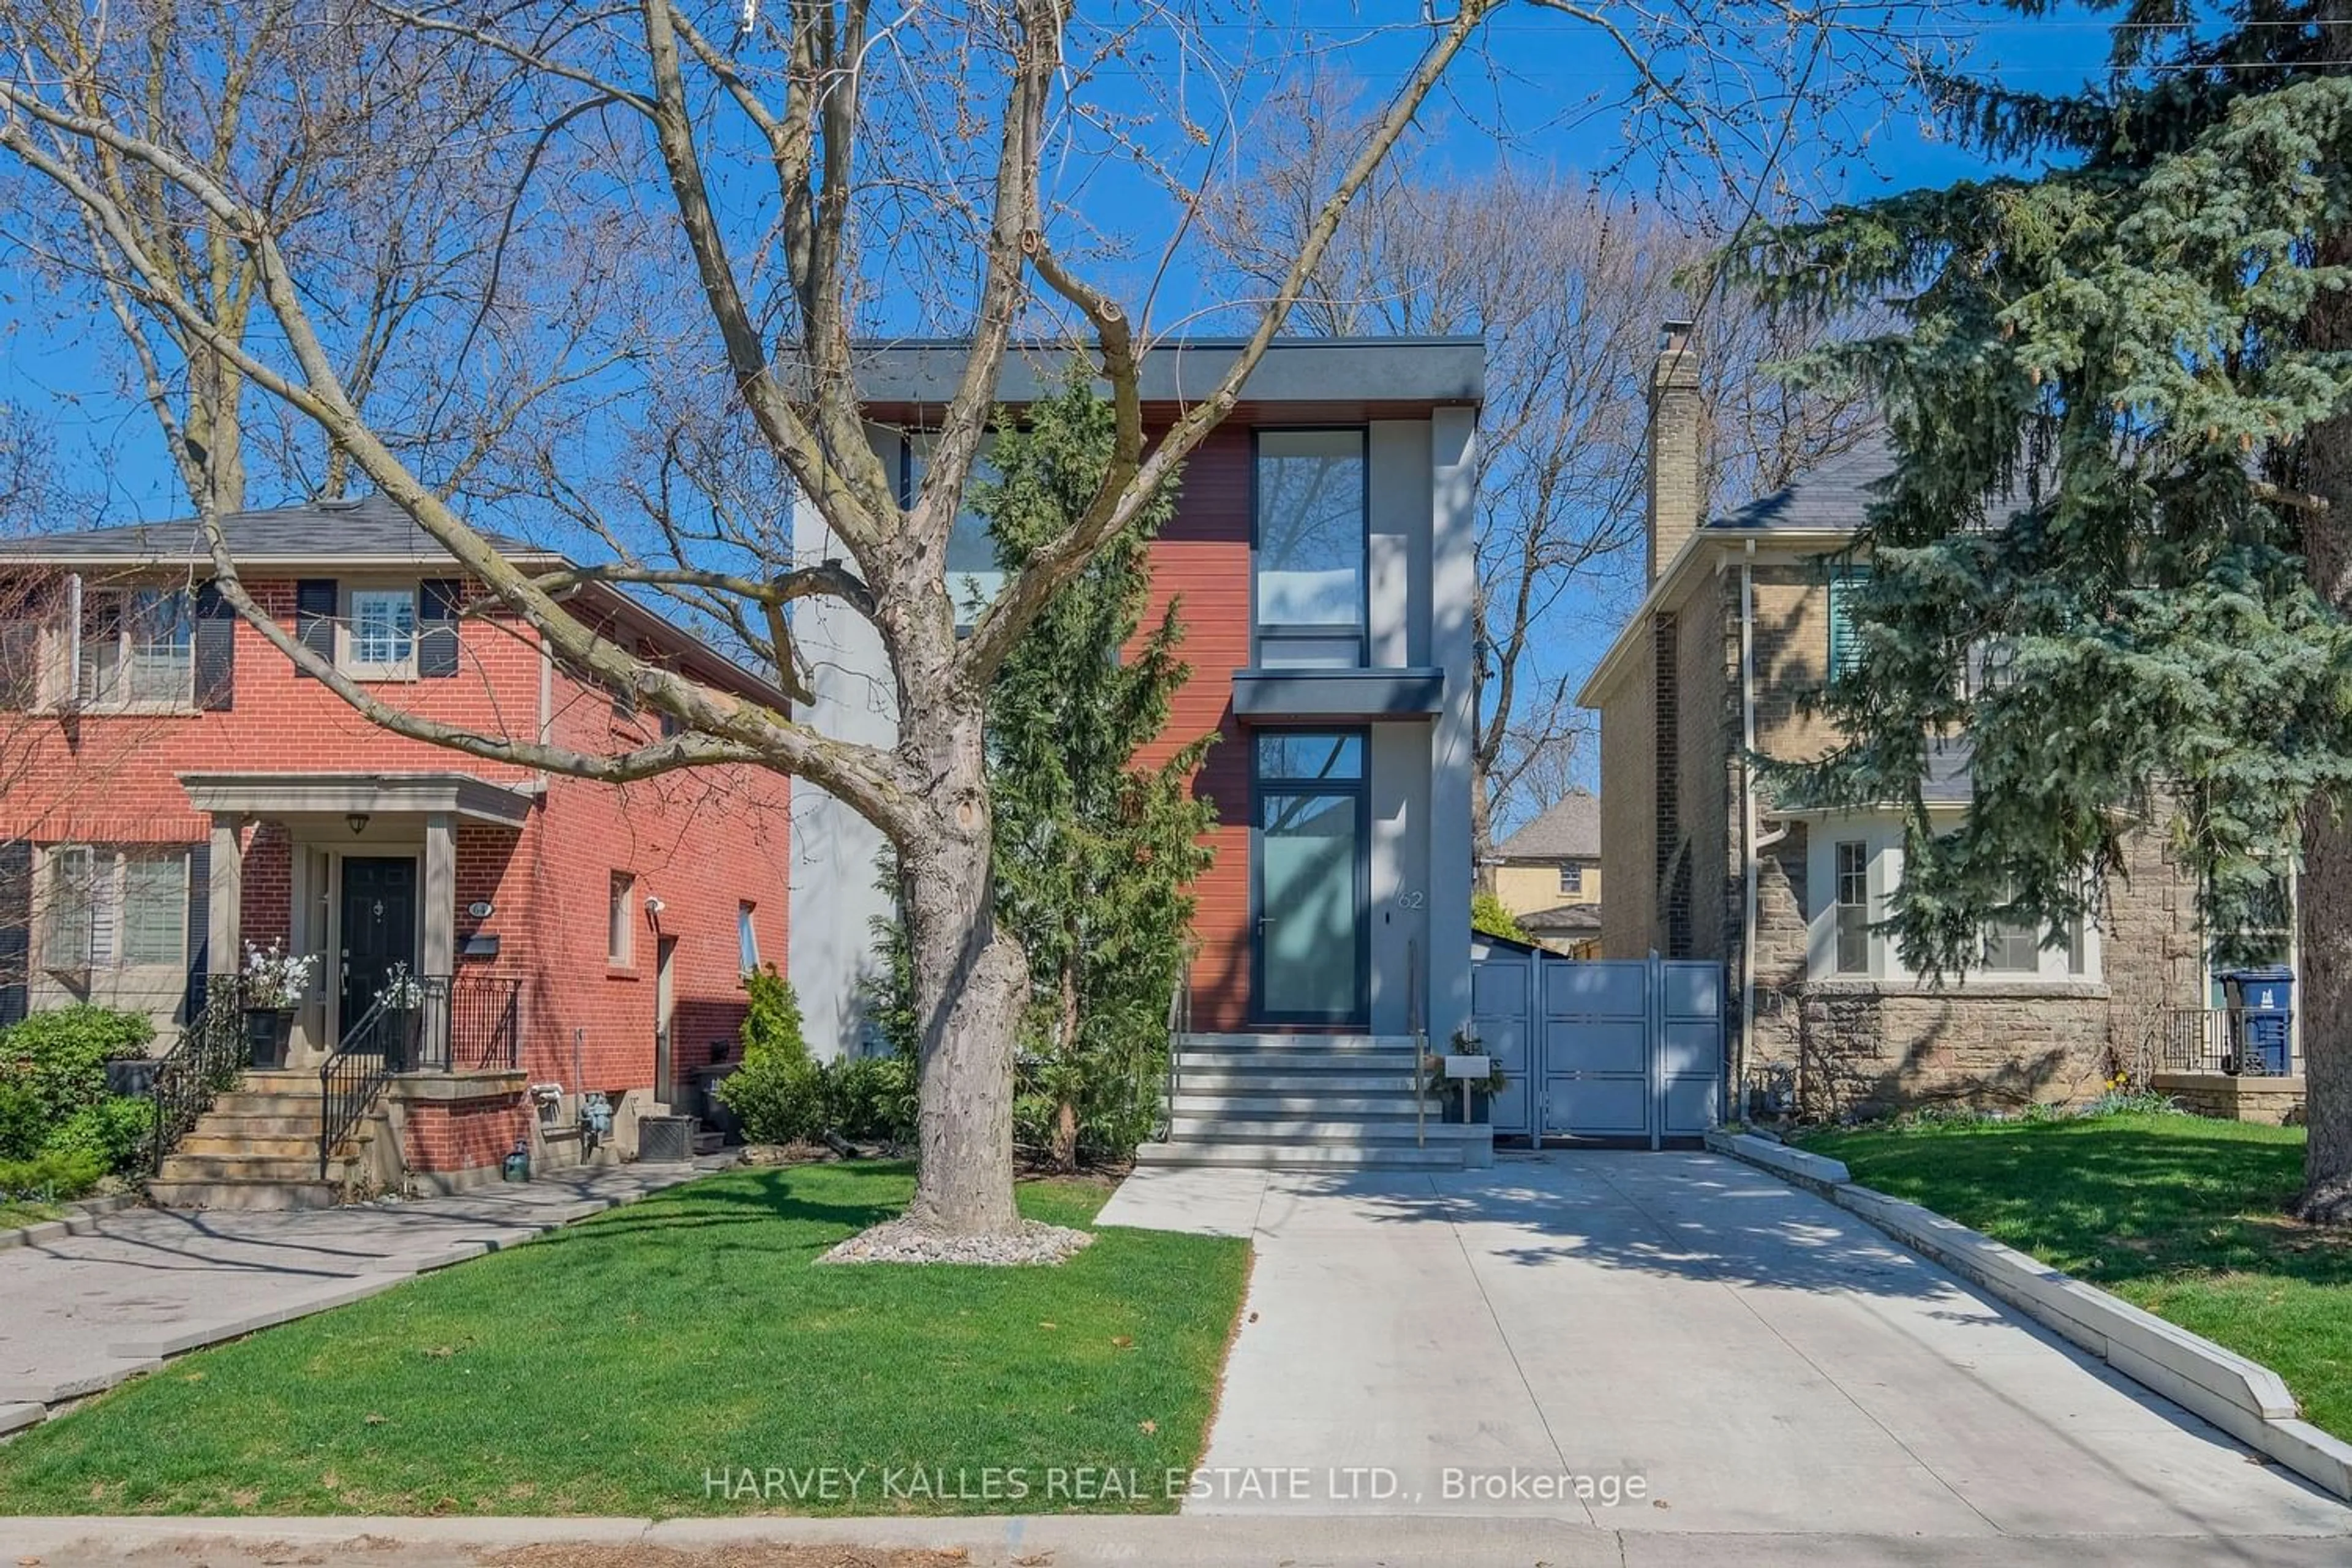 Frontside or backside of a home for 62 Felbrigg Ave, Toronto Ontario M5M 2M1